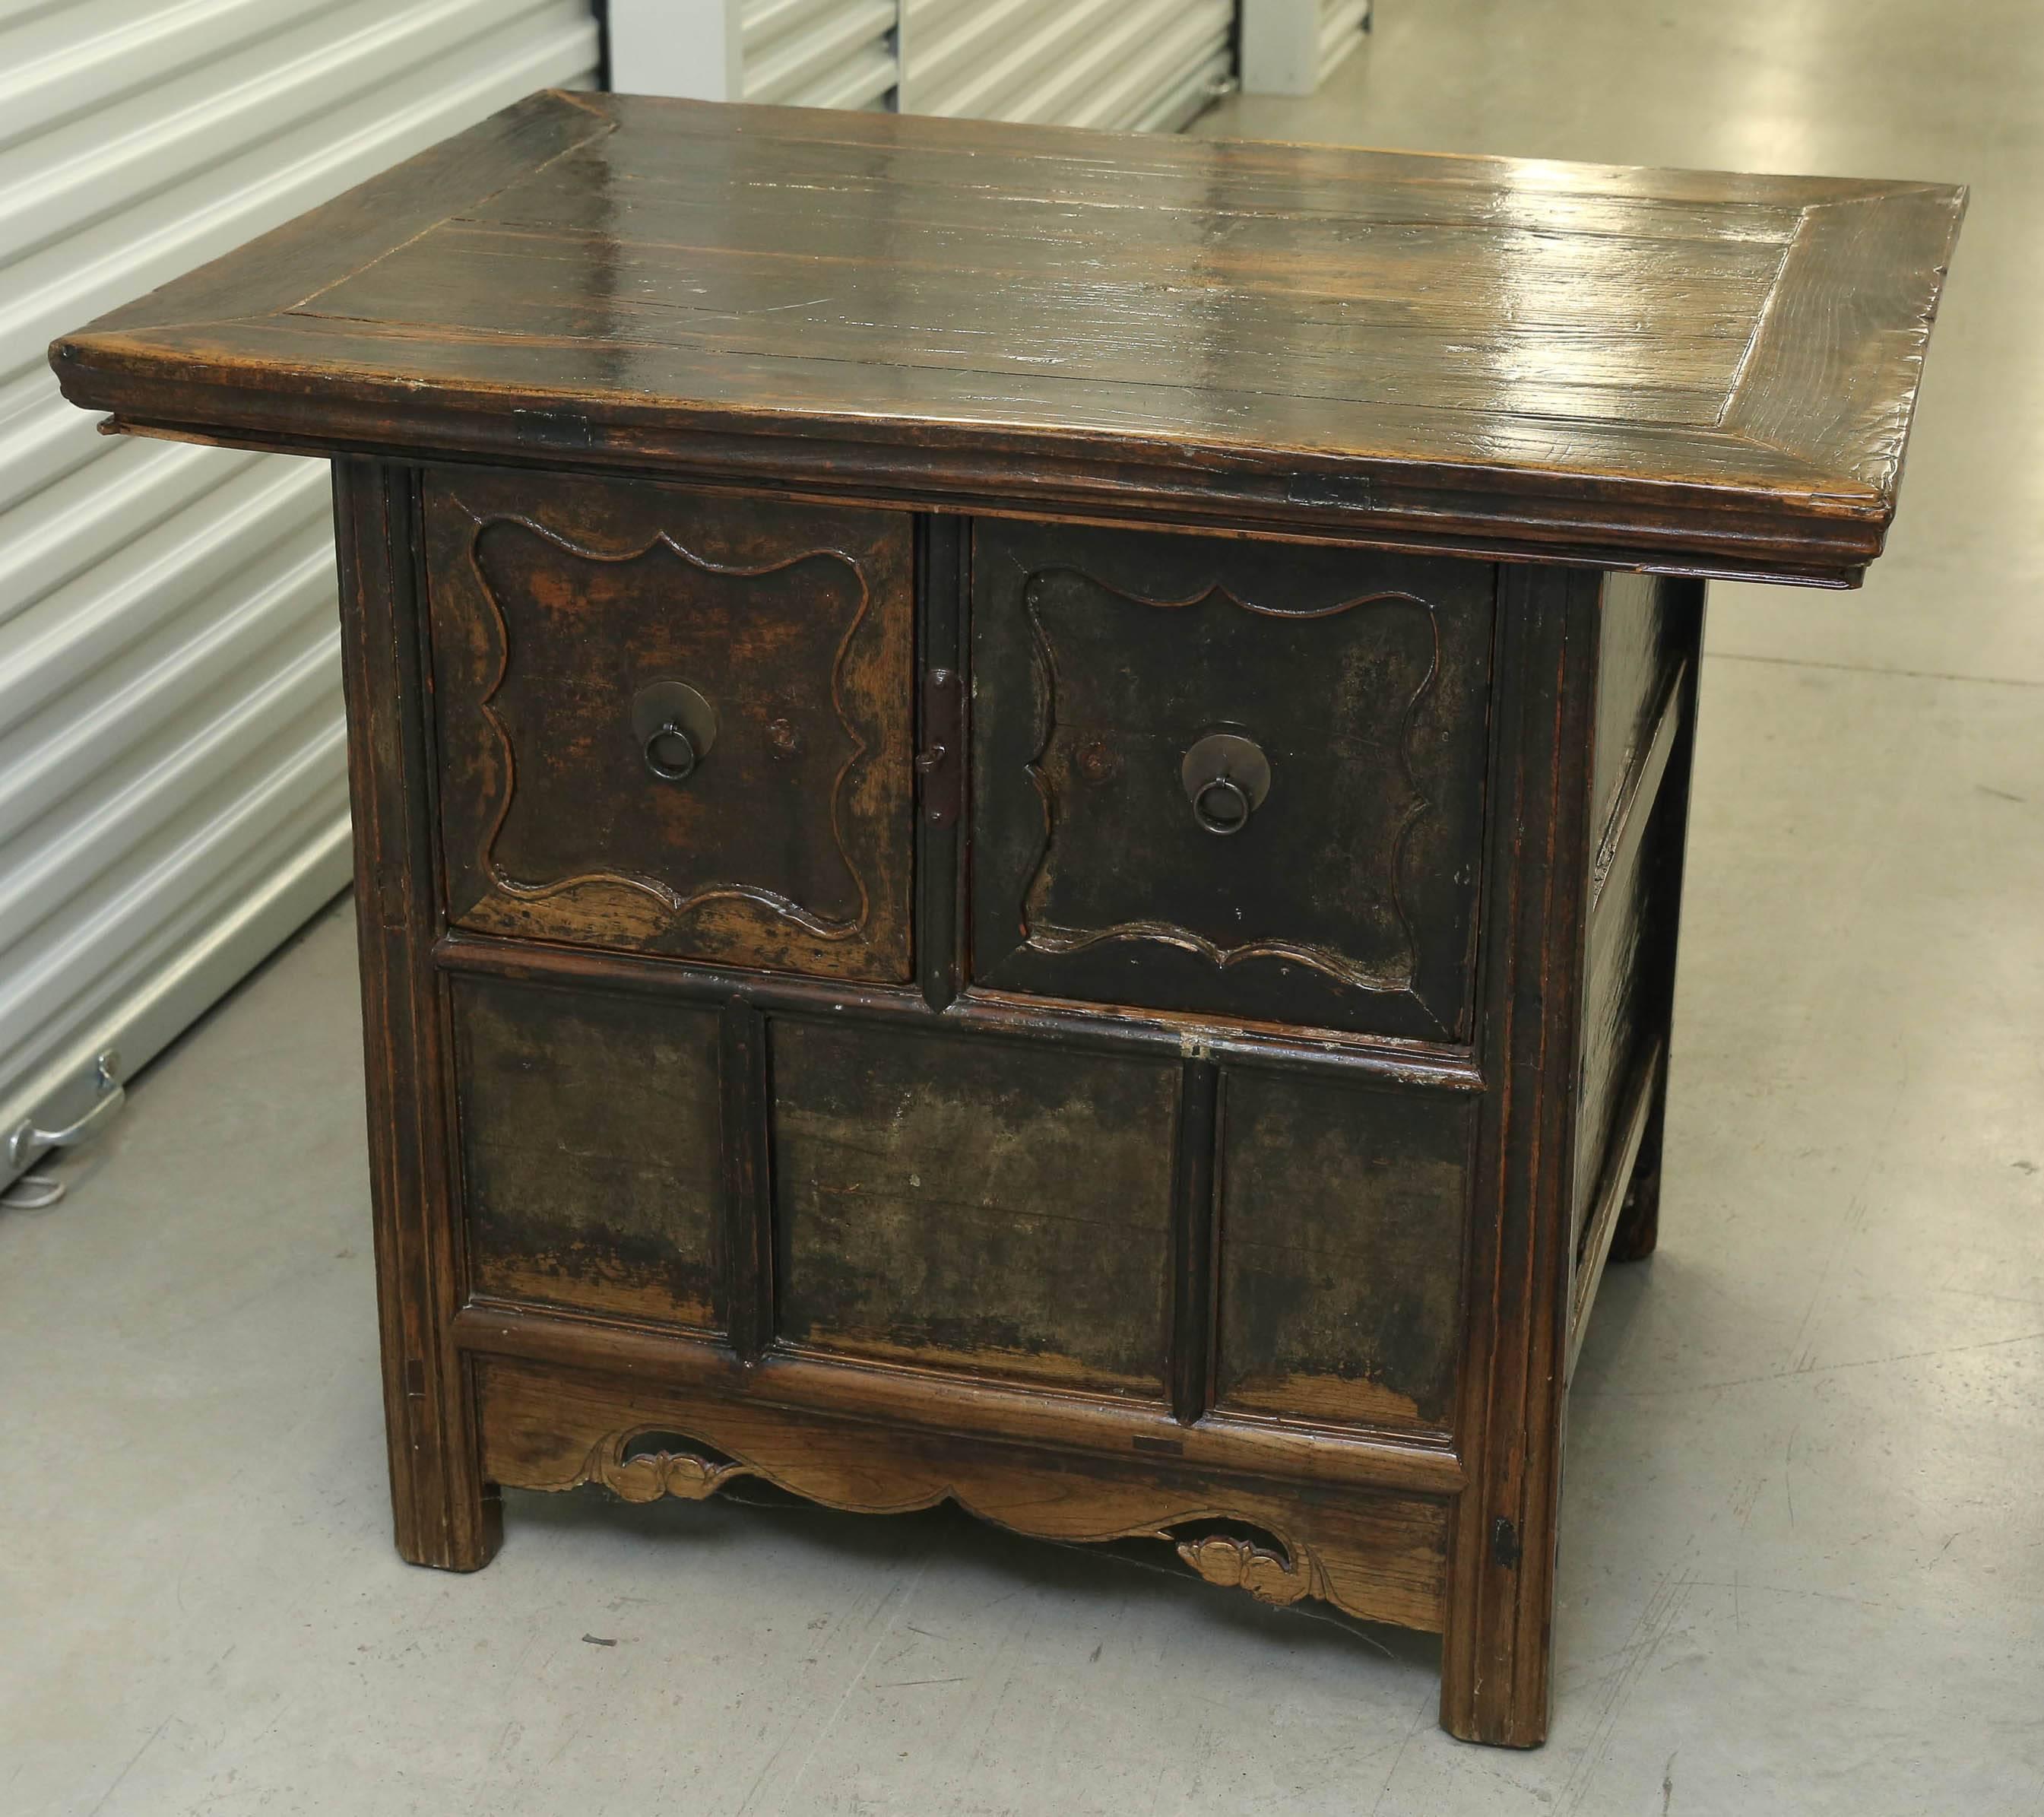 Early 20th century Chinese side cabinet or bedside table.